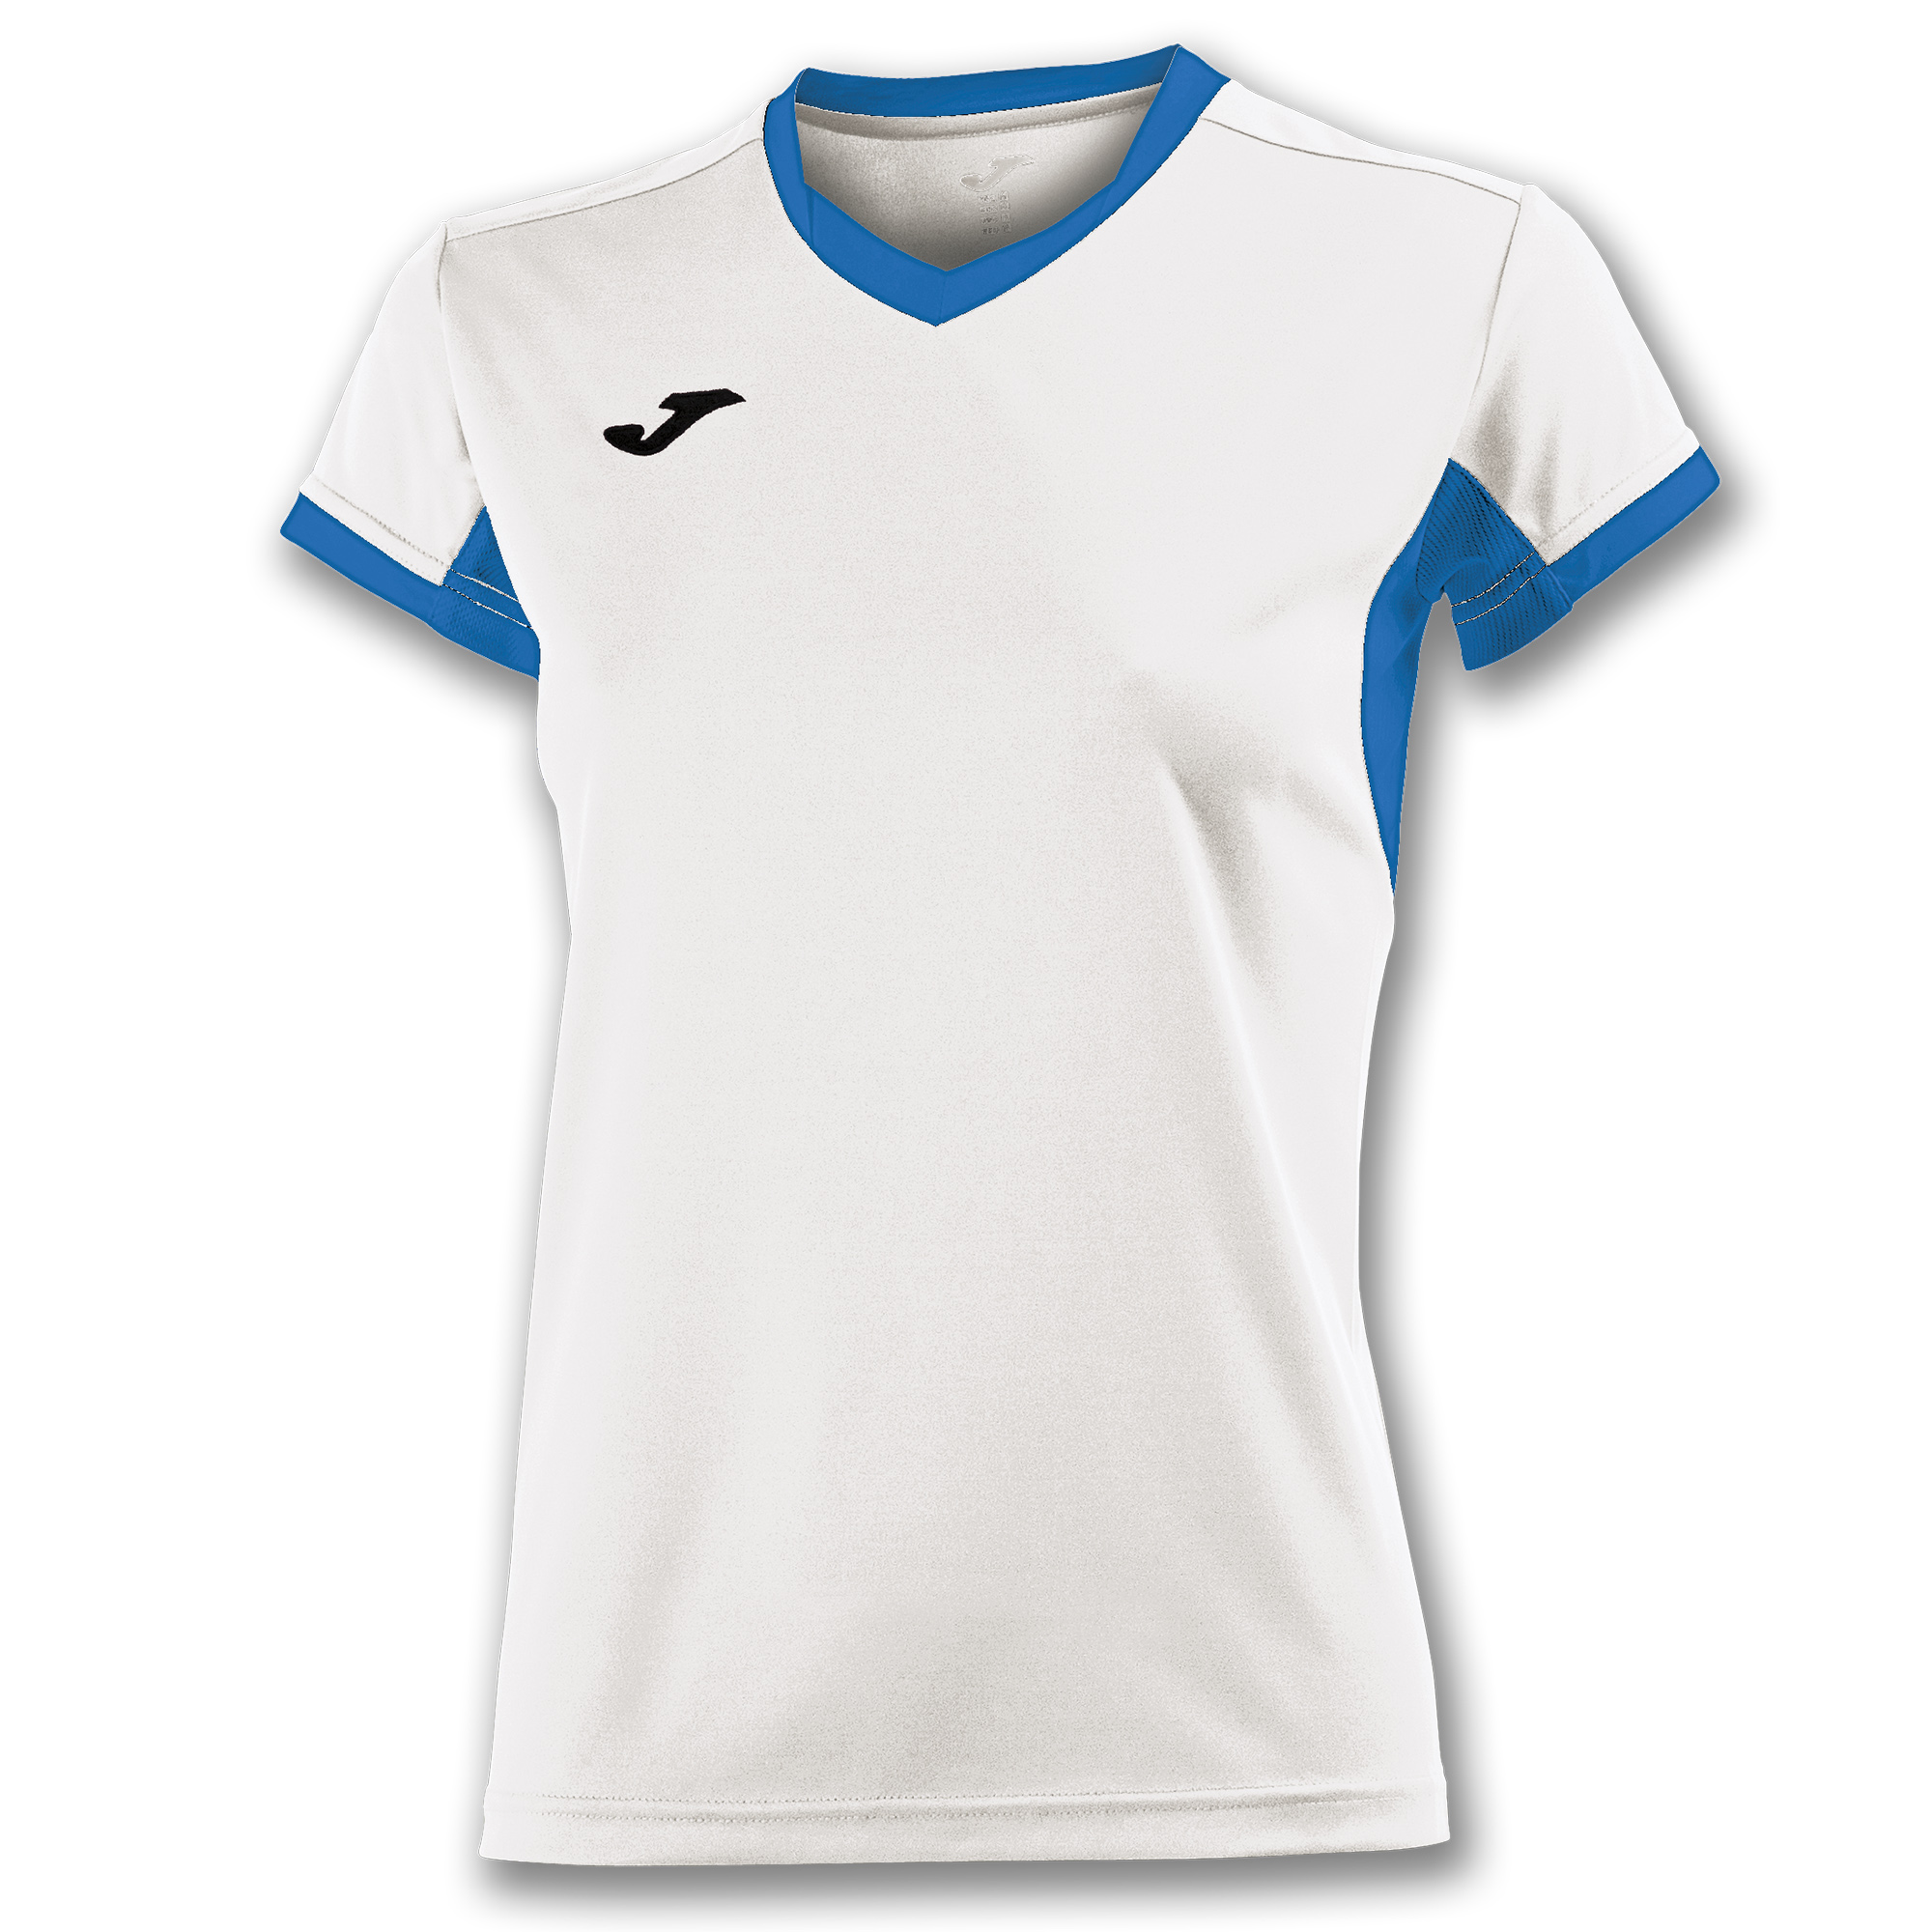 white and royal blue t shirt